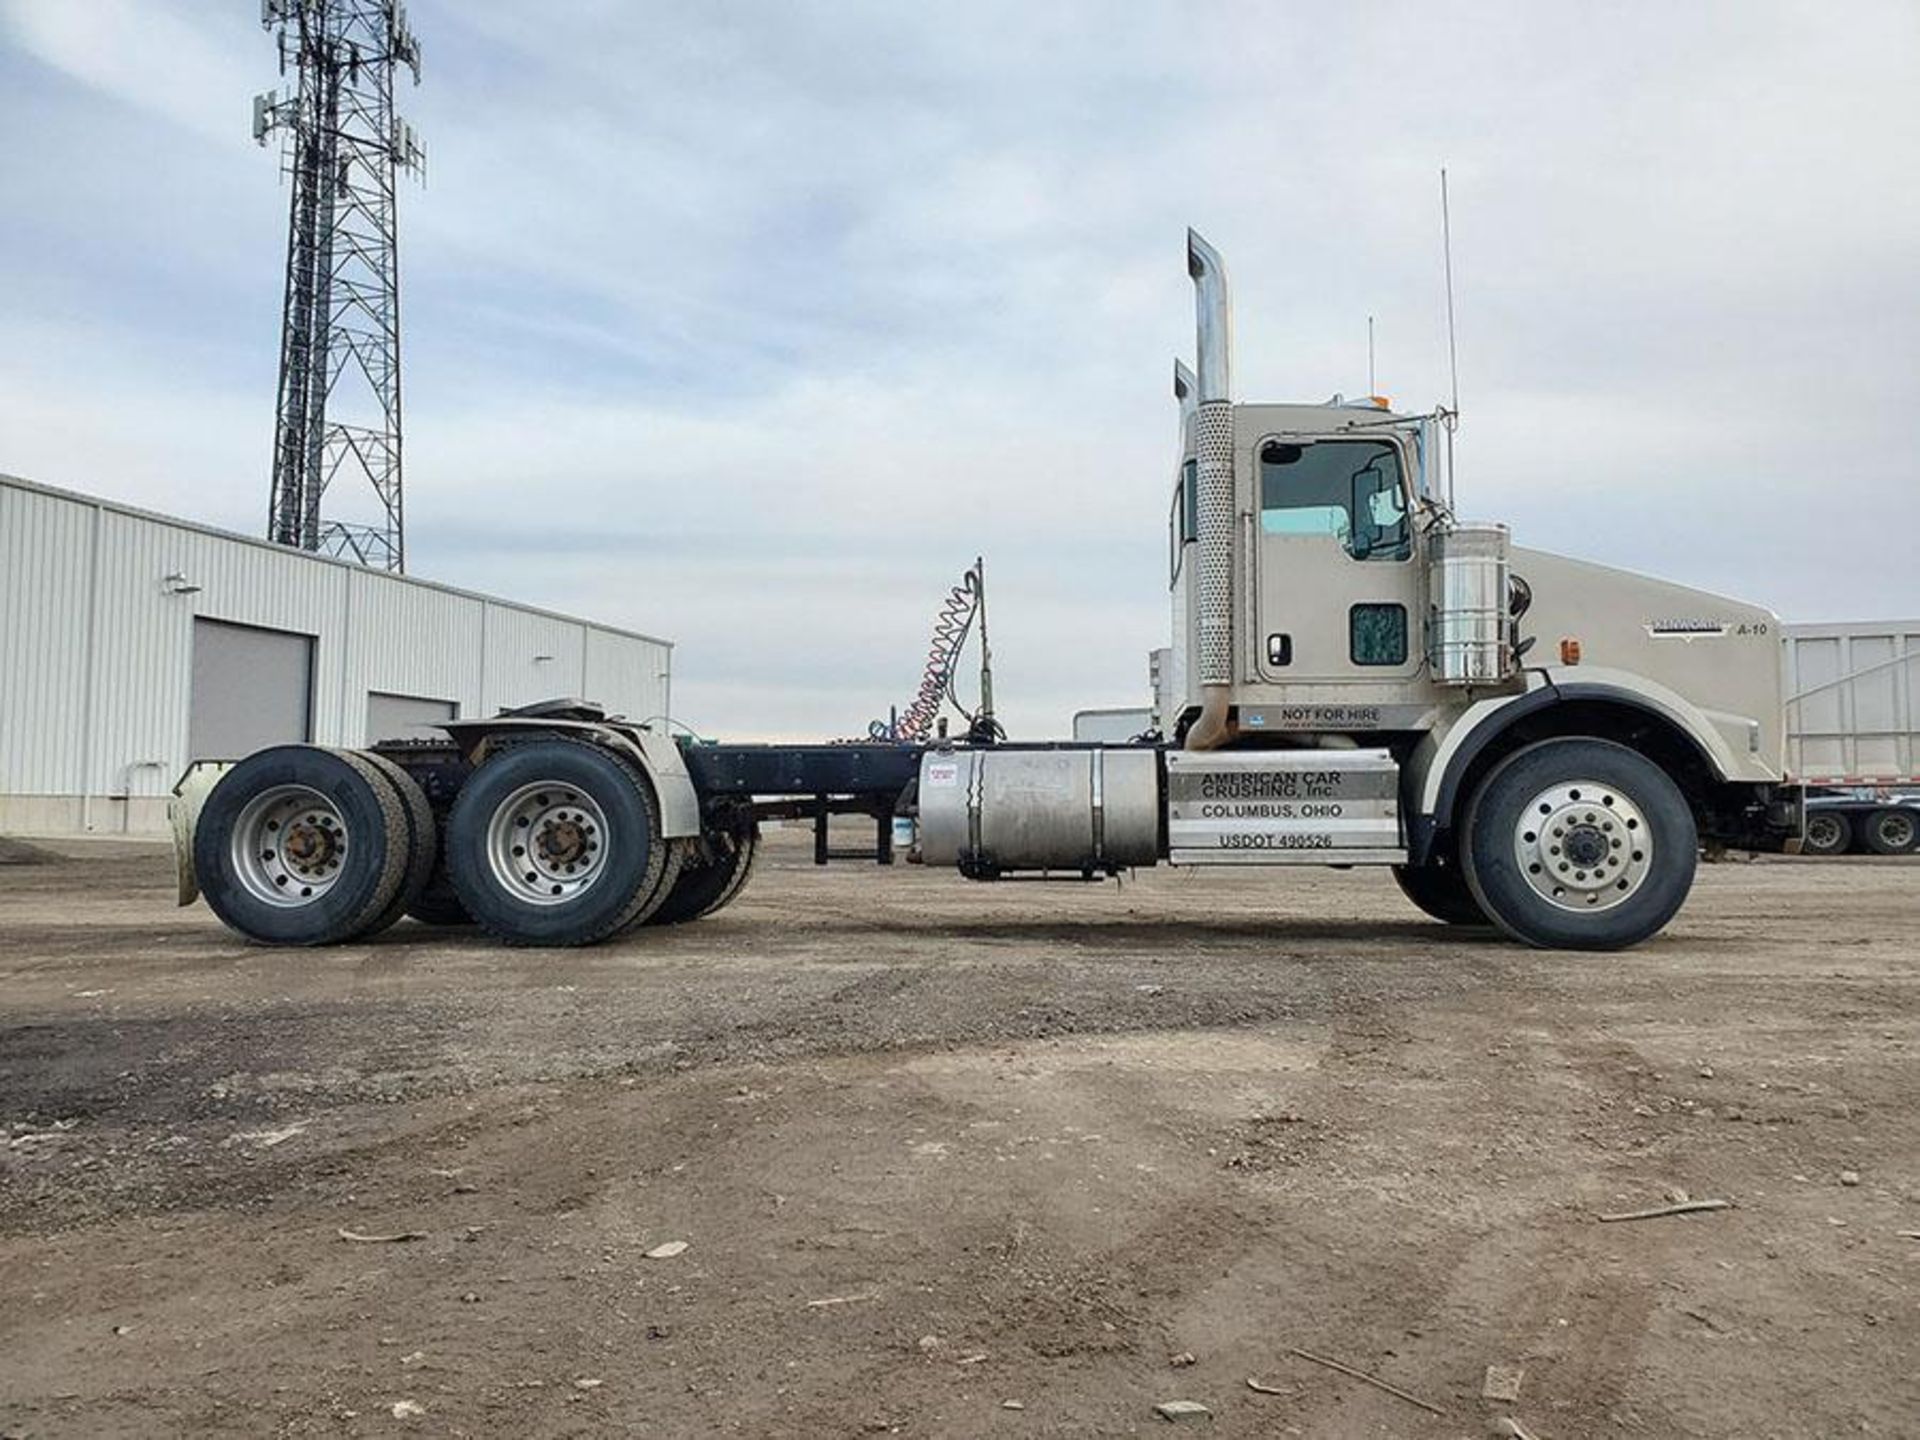 2009 Kenworth Truck Tractors, Vin 1NKDLU0X59J256959, Tandem Axle, Day Cab, Extended Frame, 813 Cat D - Image 10 of 18